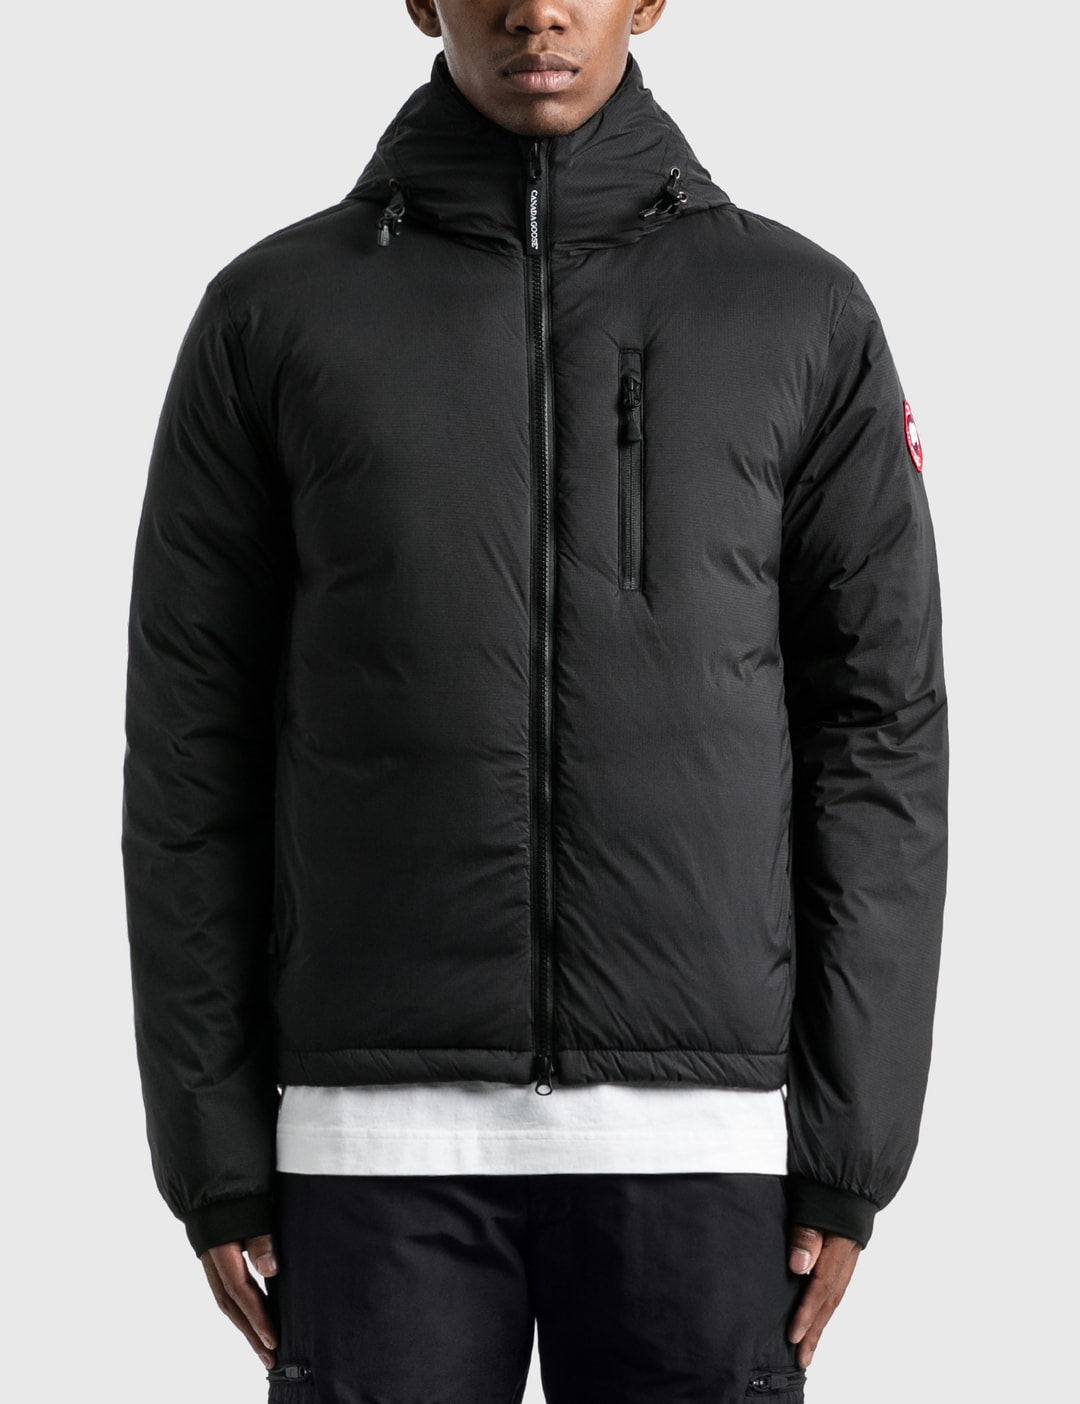 jeg er enig besøg råd Canada Goose - Lodge Down Hoody Matte Finish | HBX - Globally Curated  Fashion and Lifestyle by Hypebeast